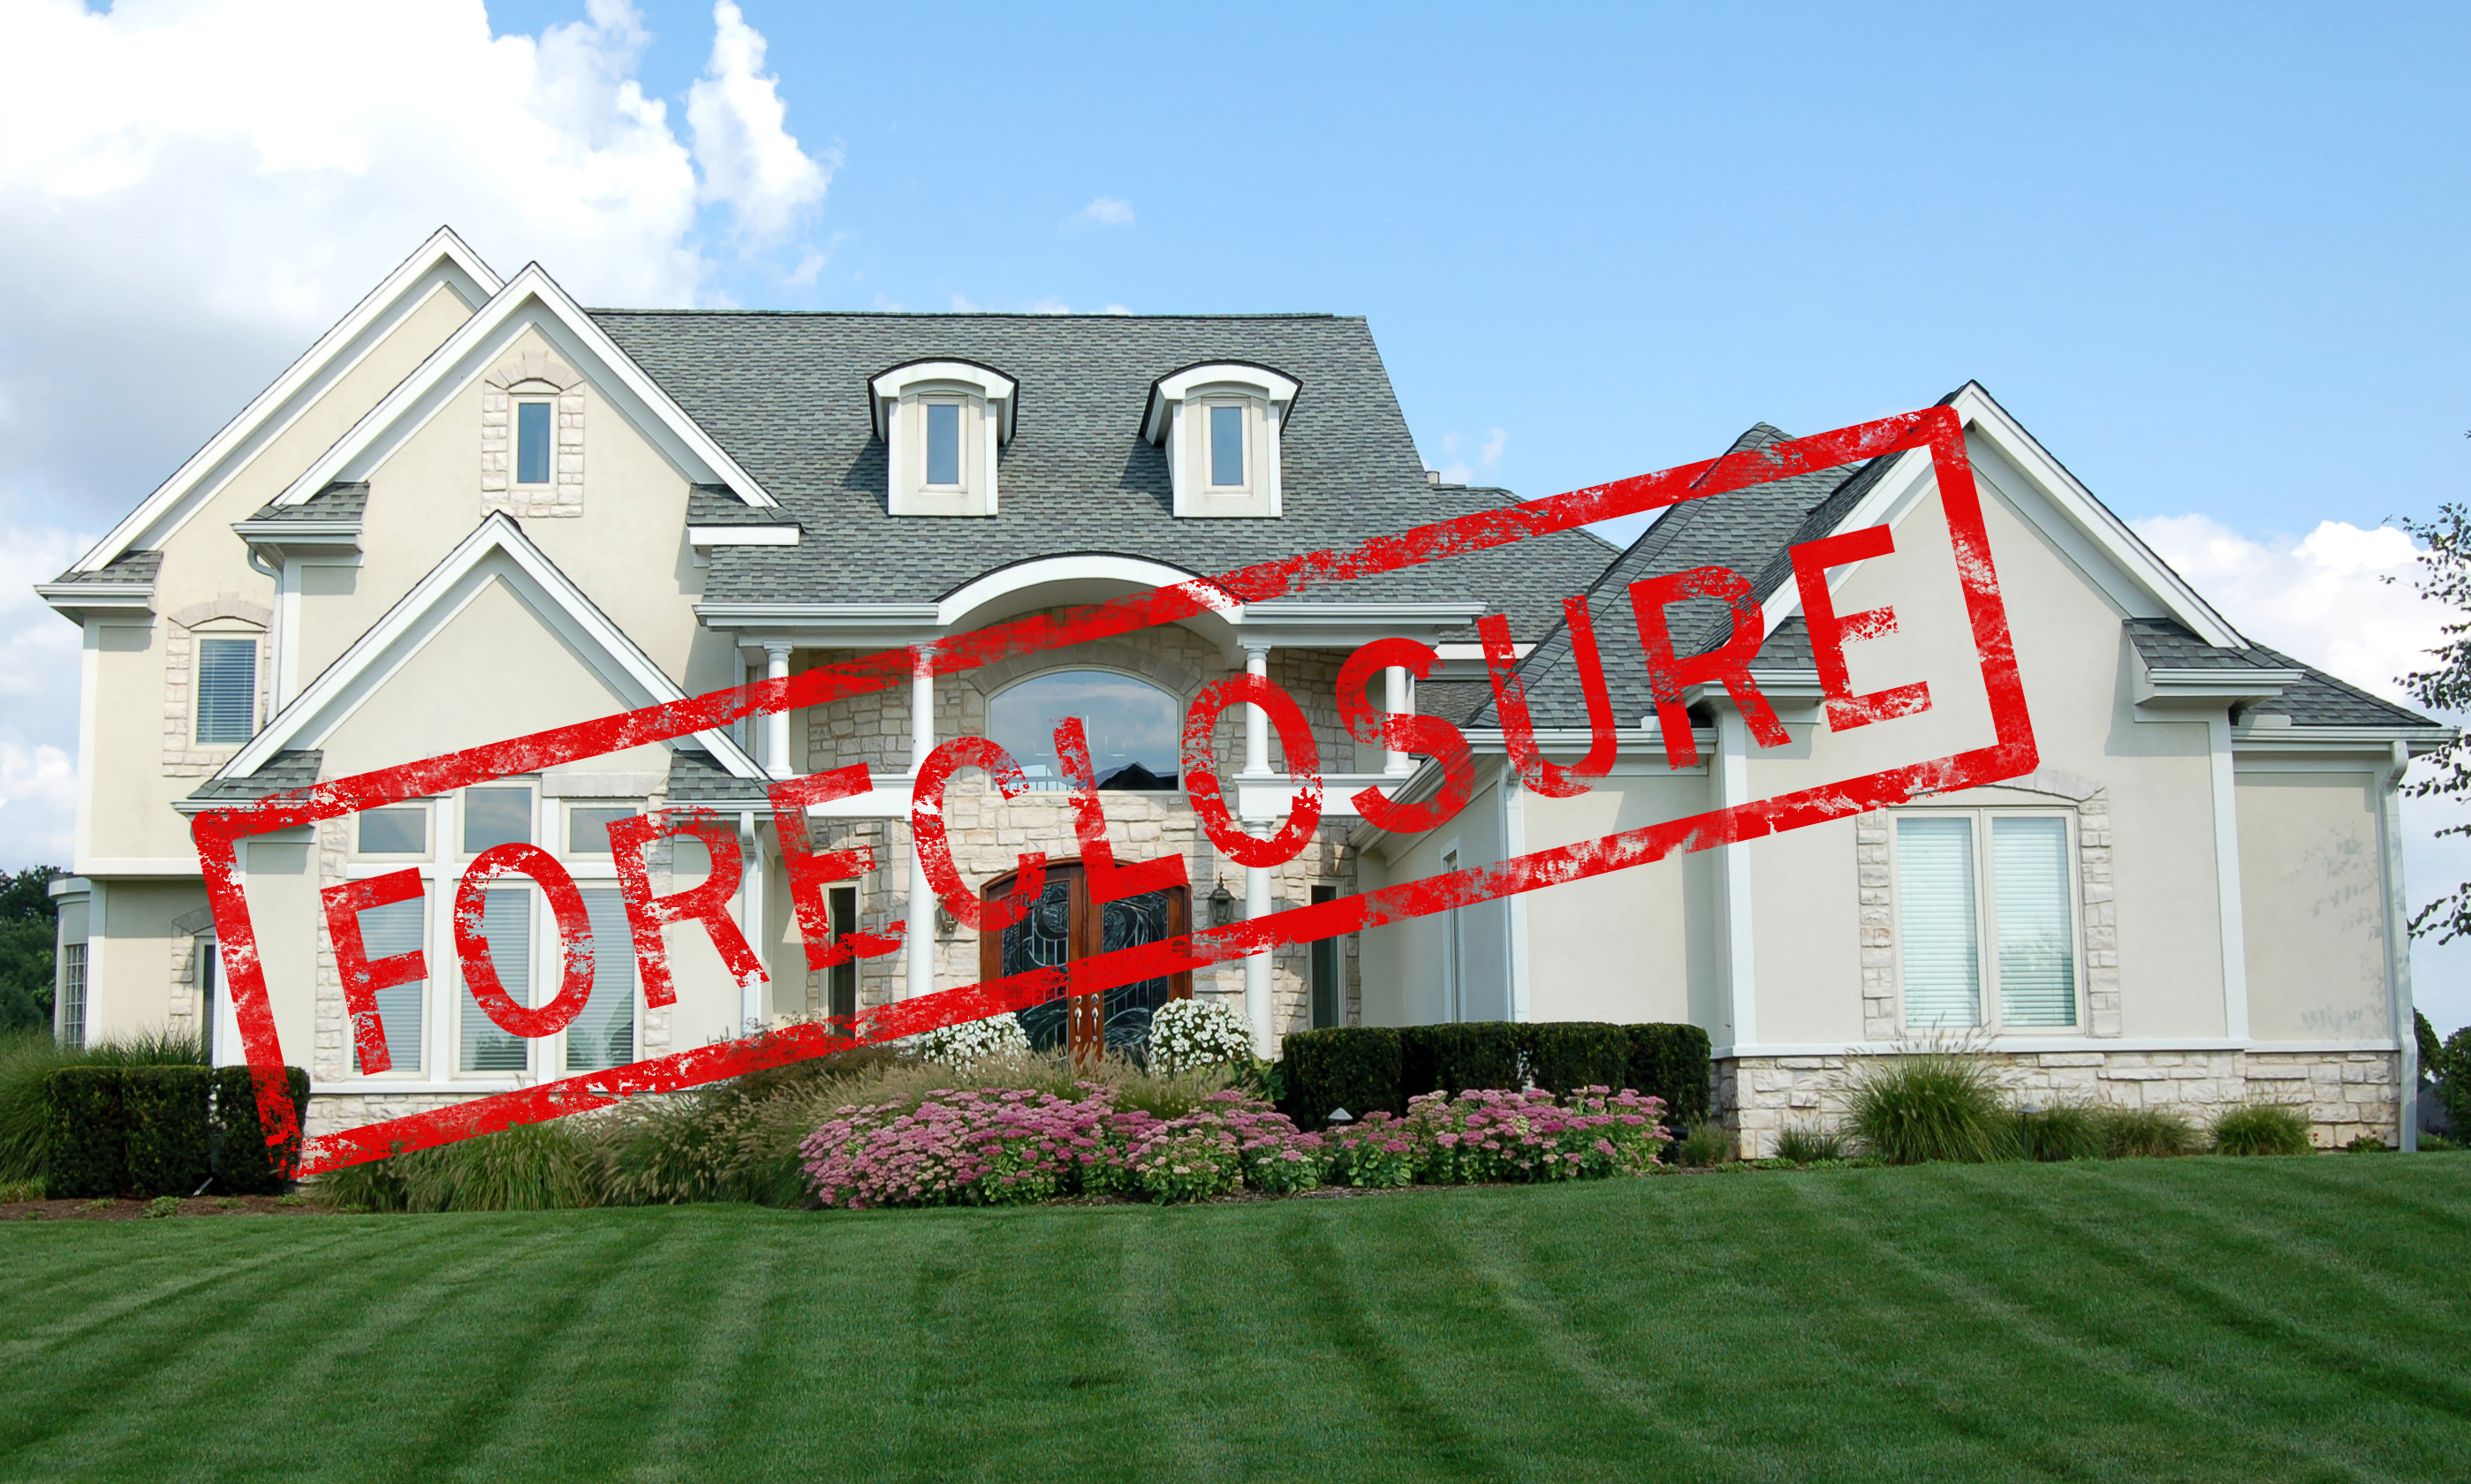 Call Appraisers of NE Ohio to discuss appraisals for Summit foreclosures